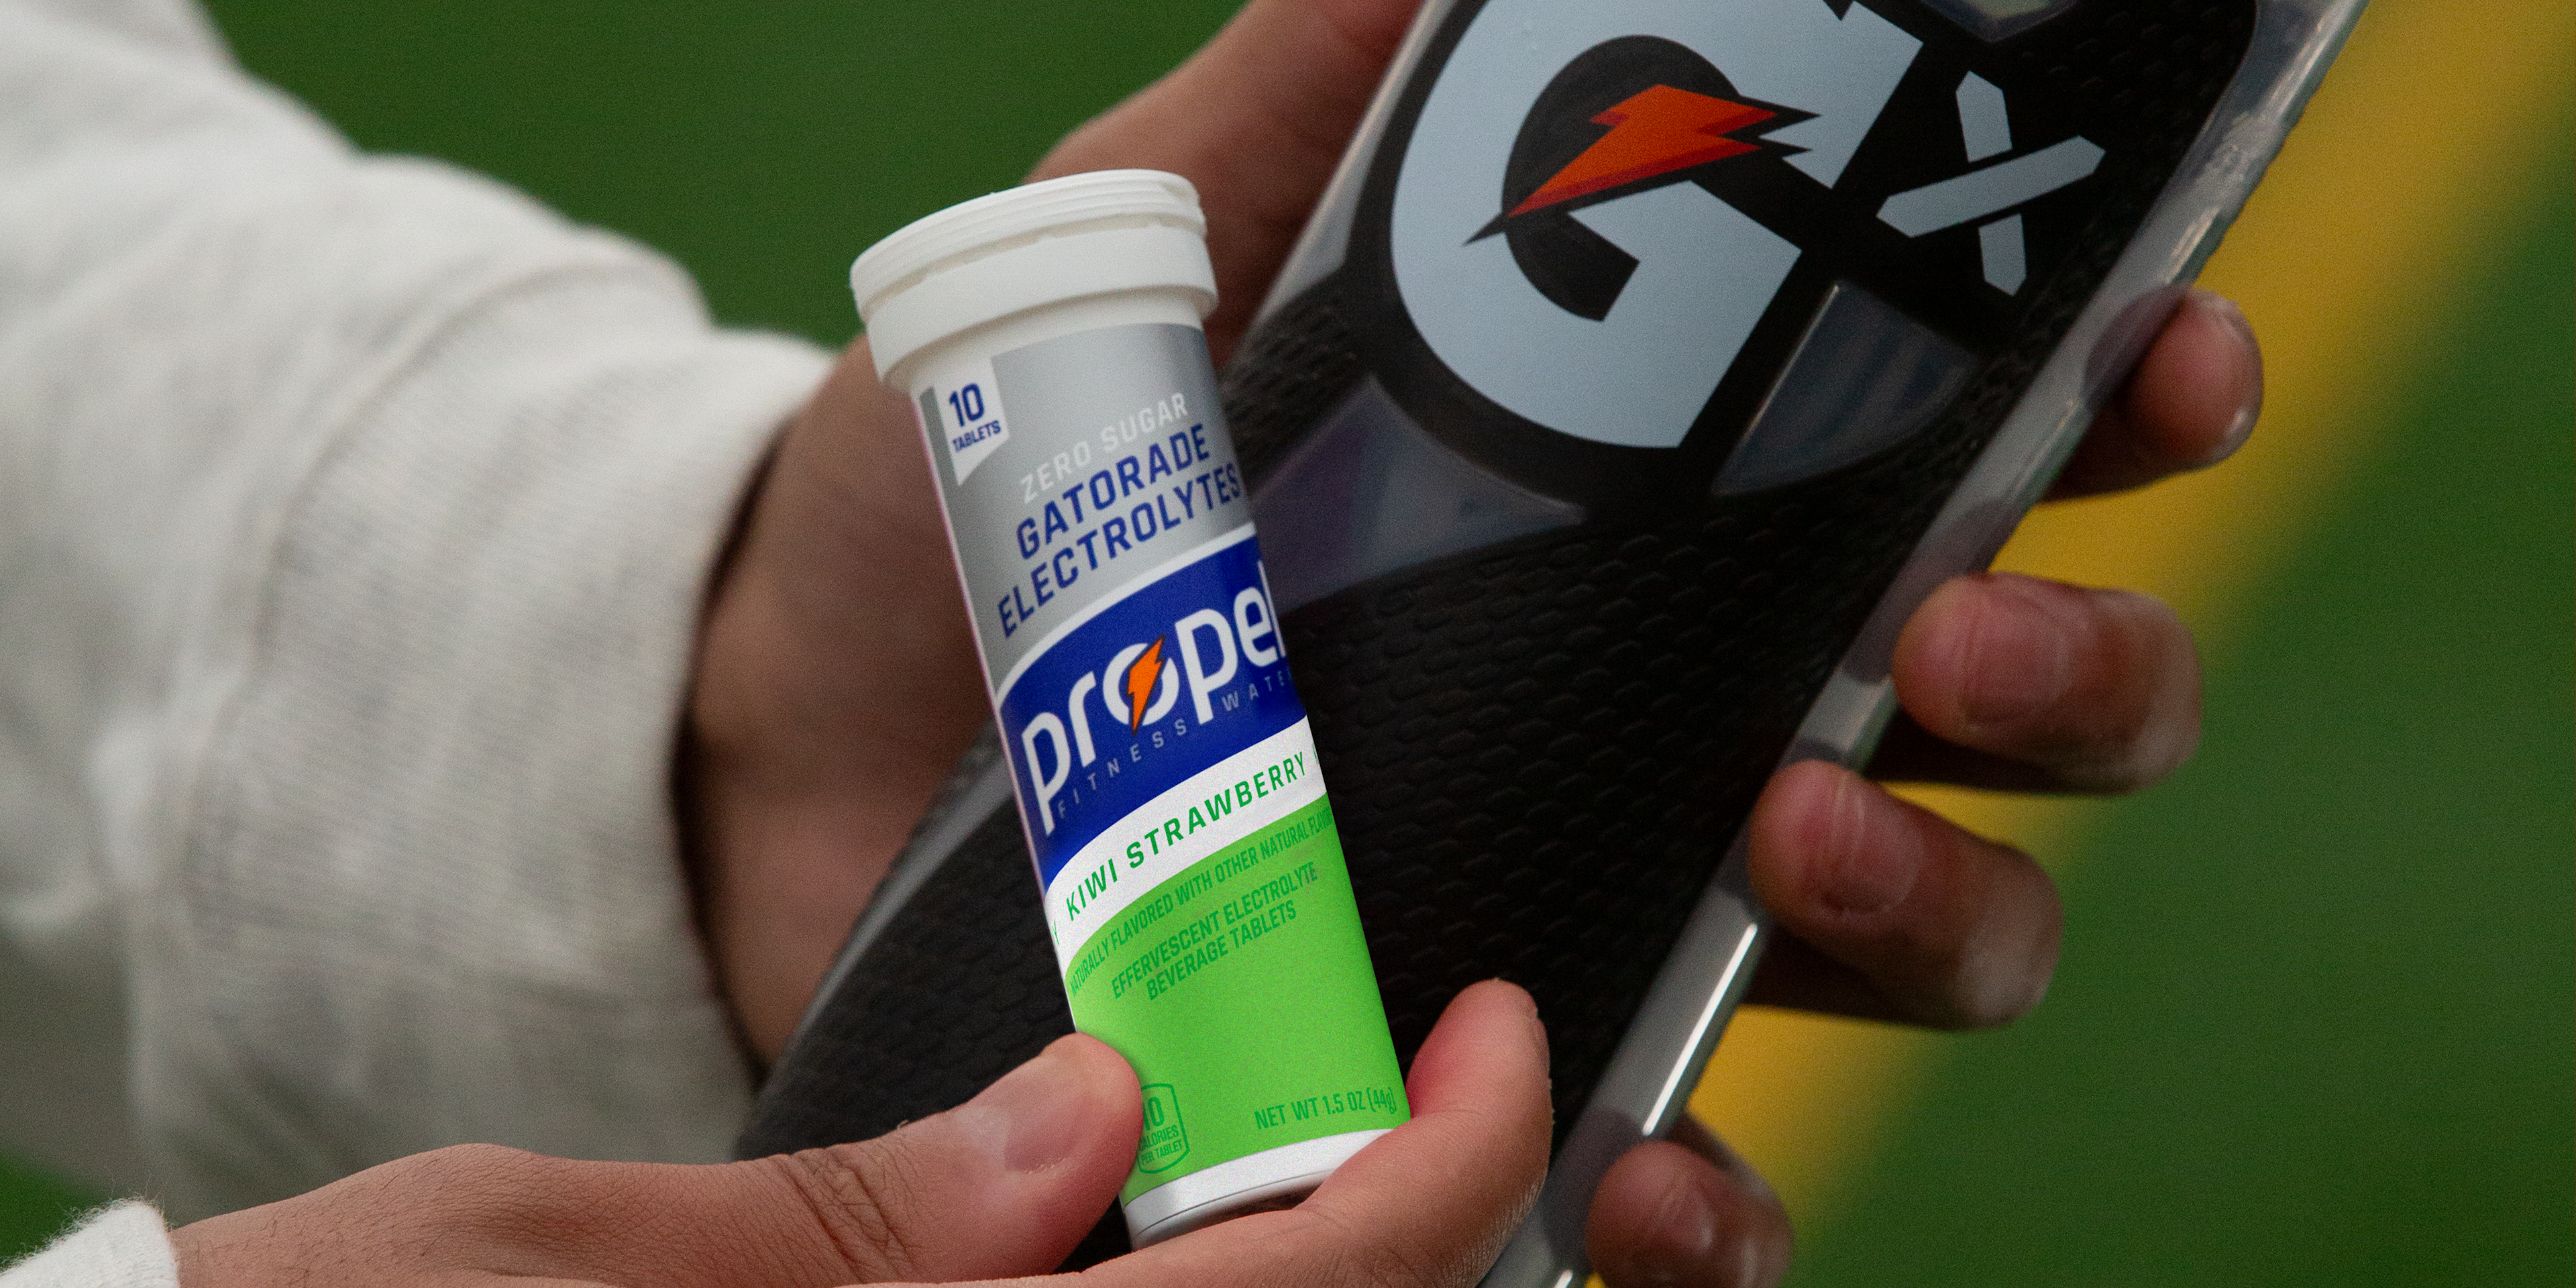 Propel Kiwi Strawberry Tablet pack and Gx Squeeze bottle in athlete's hands.